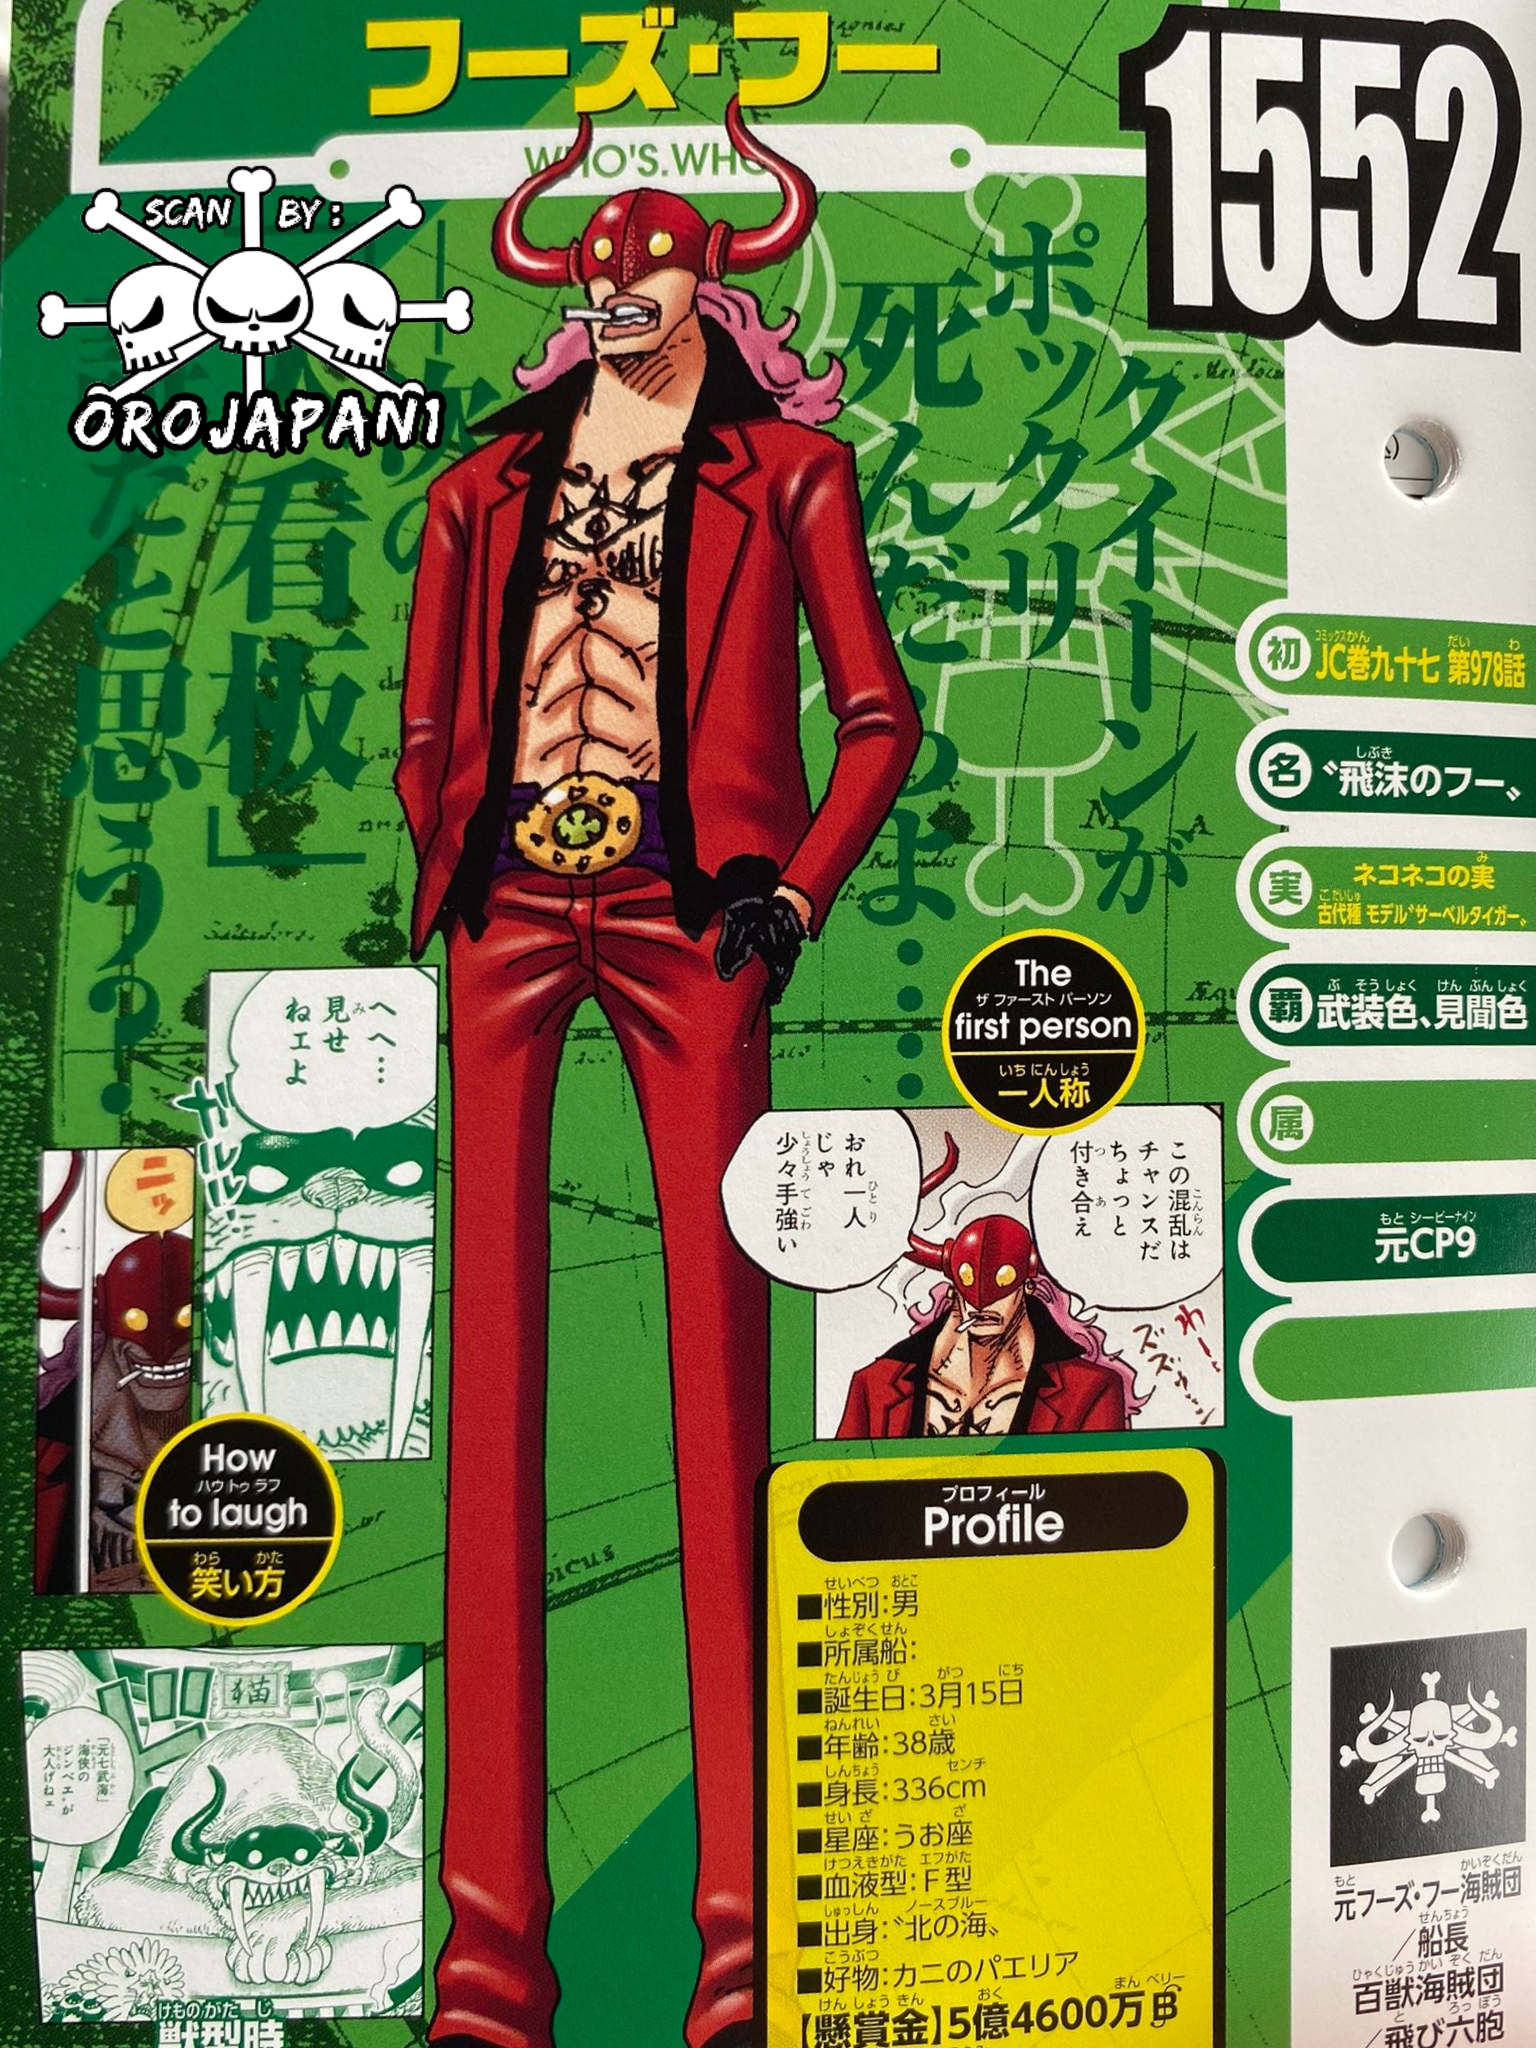 Orojapan Who S Who Vivre Card Onepiece Who S Who 1552 Gender Male Birthday March 15 Age 38 Years Old Height 336 Cm Blood Type F